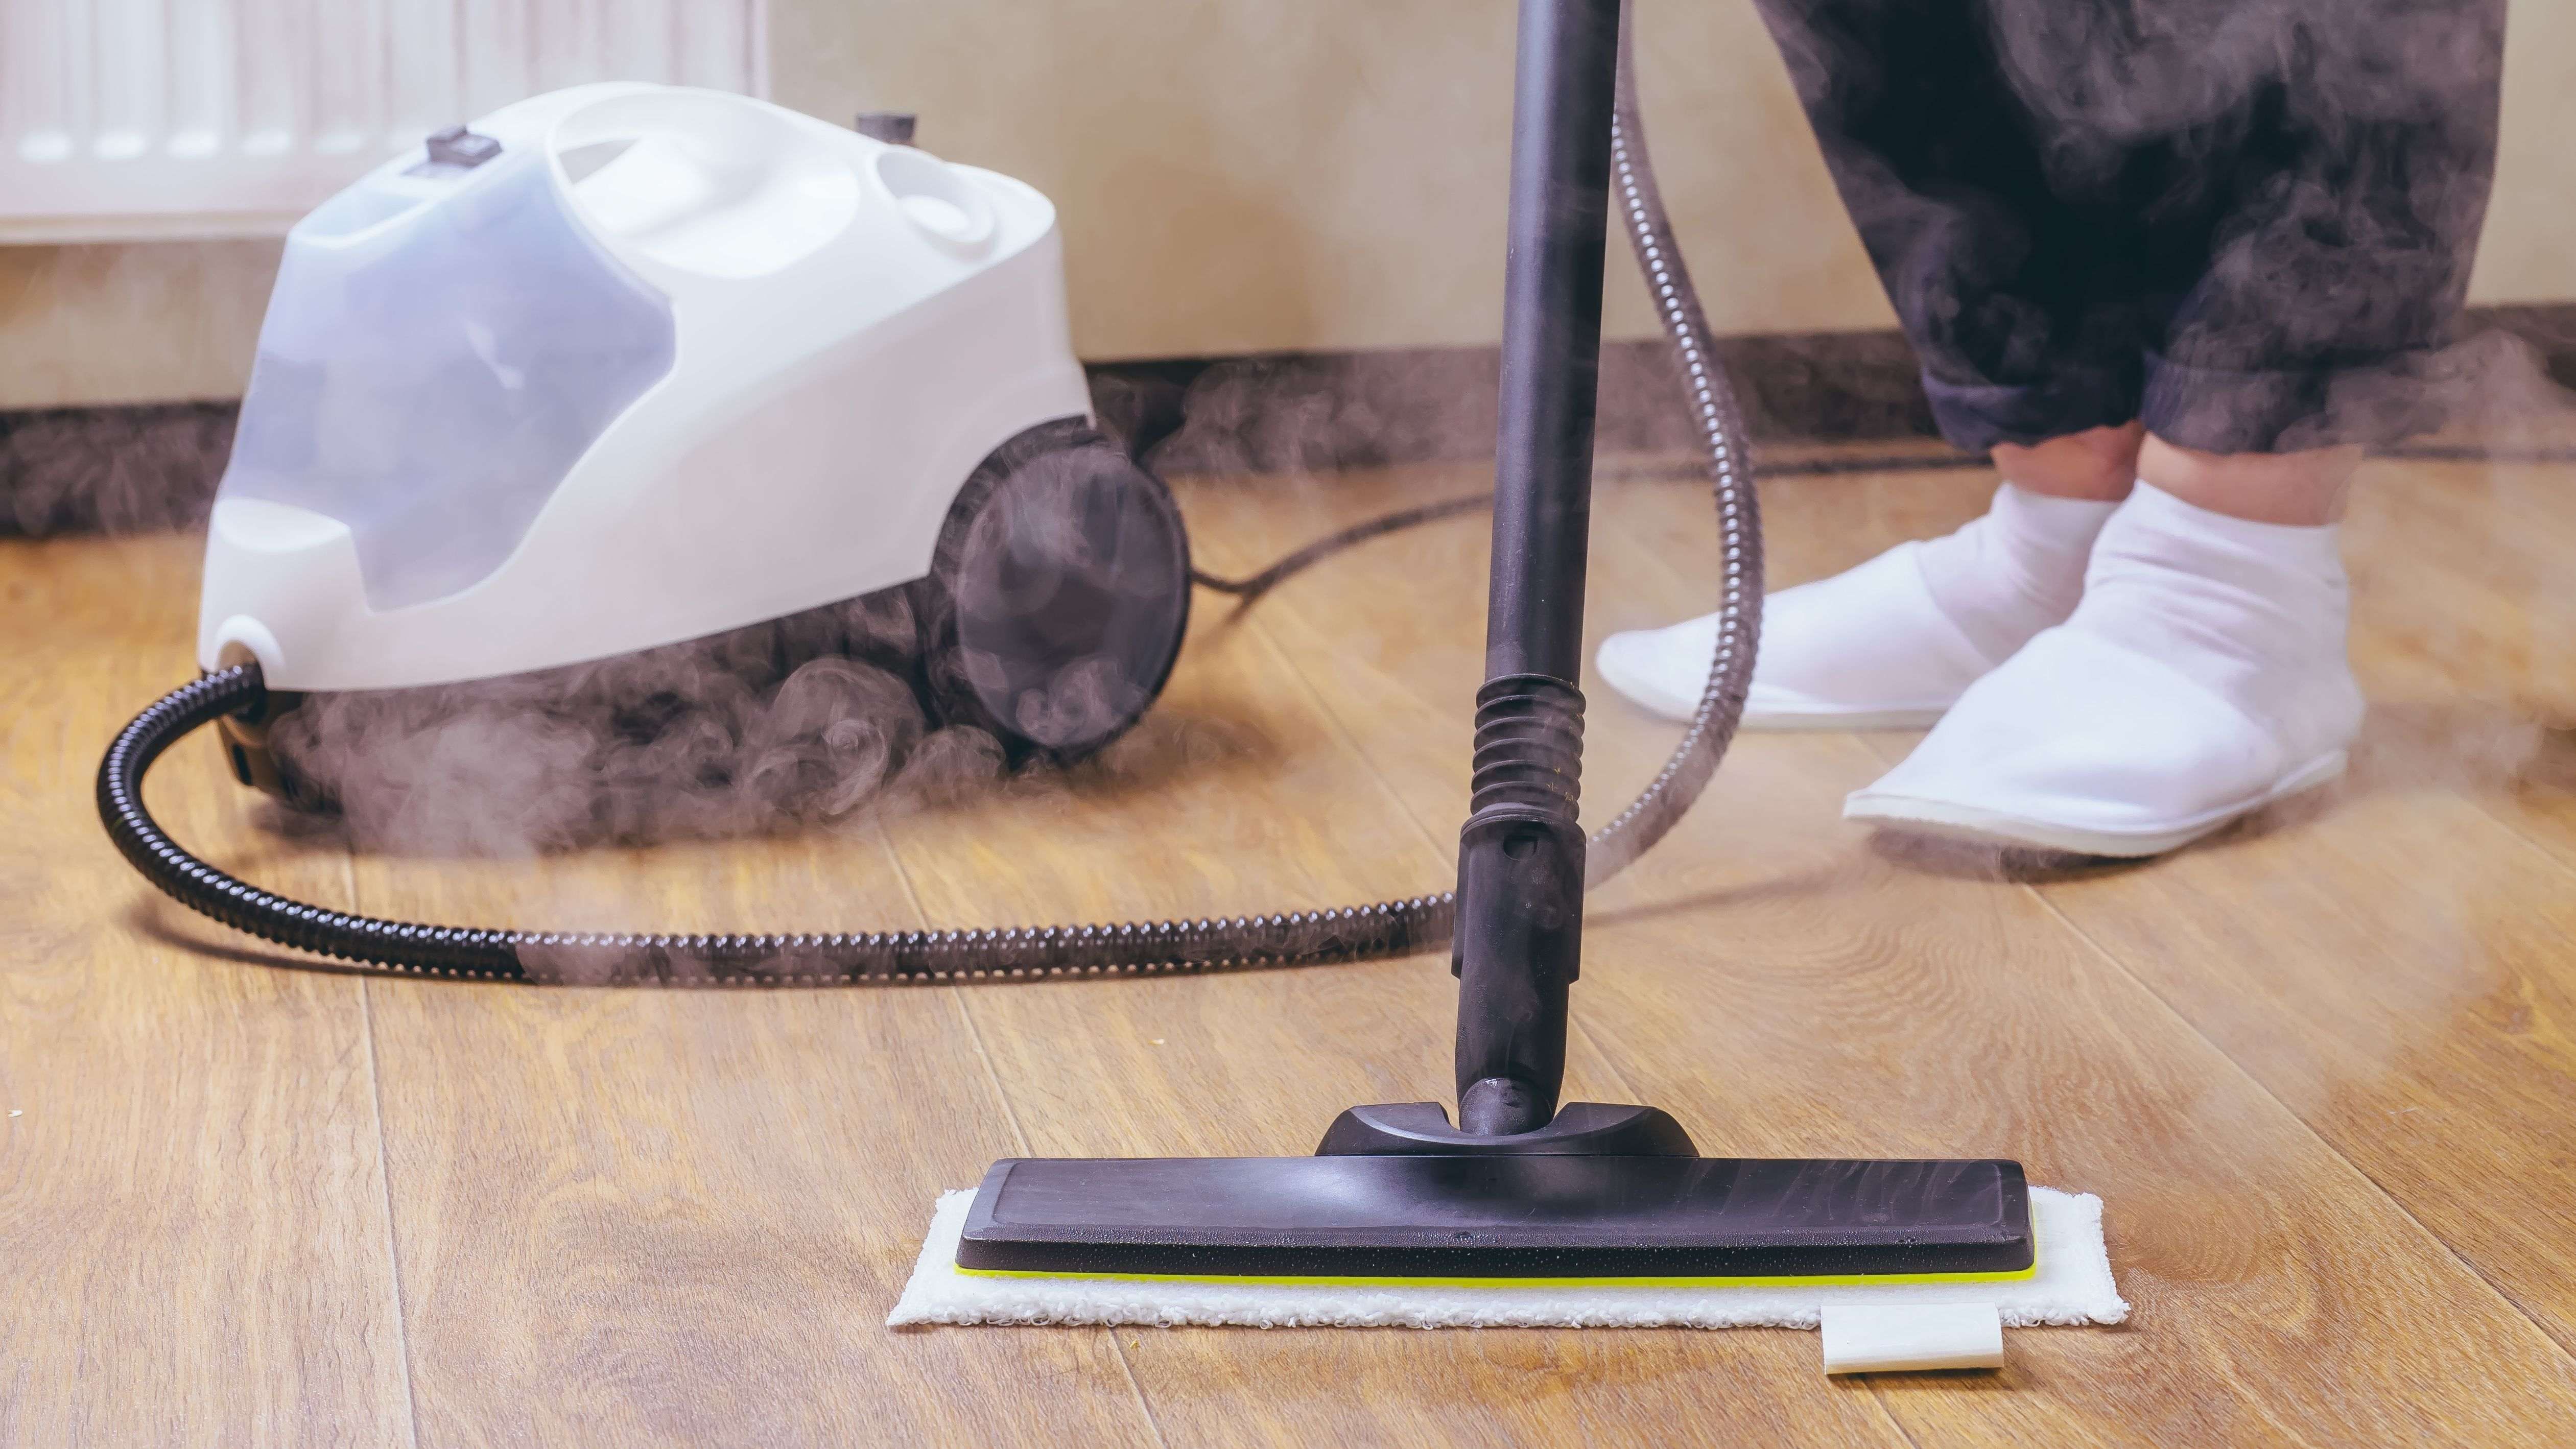 Steam cleaner buying guide